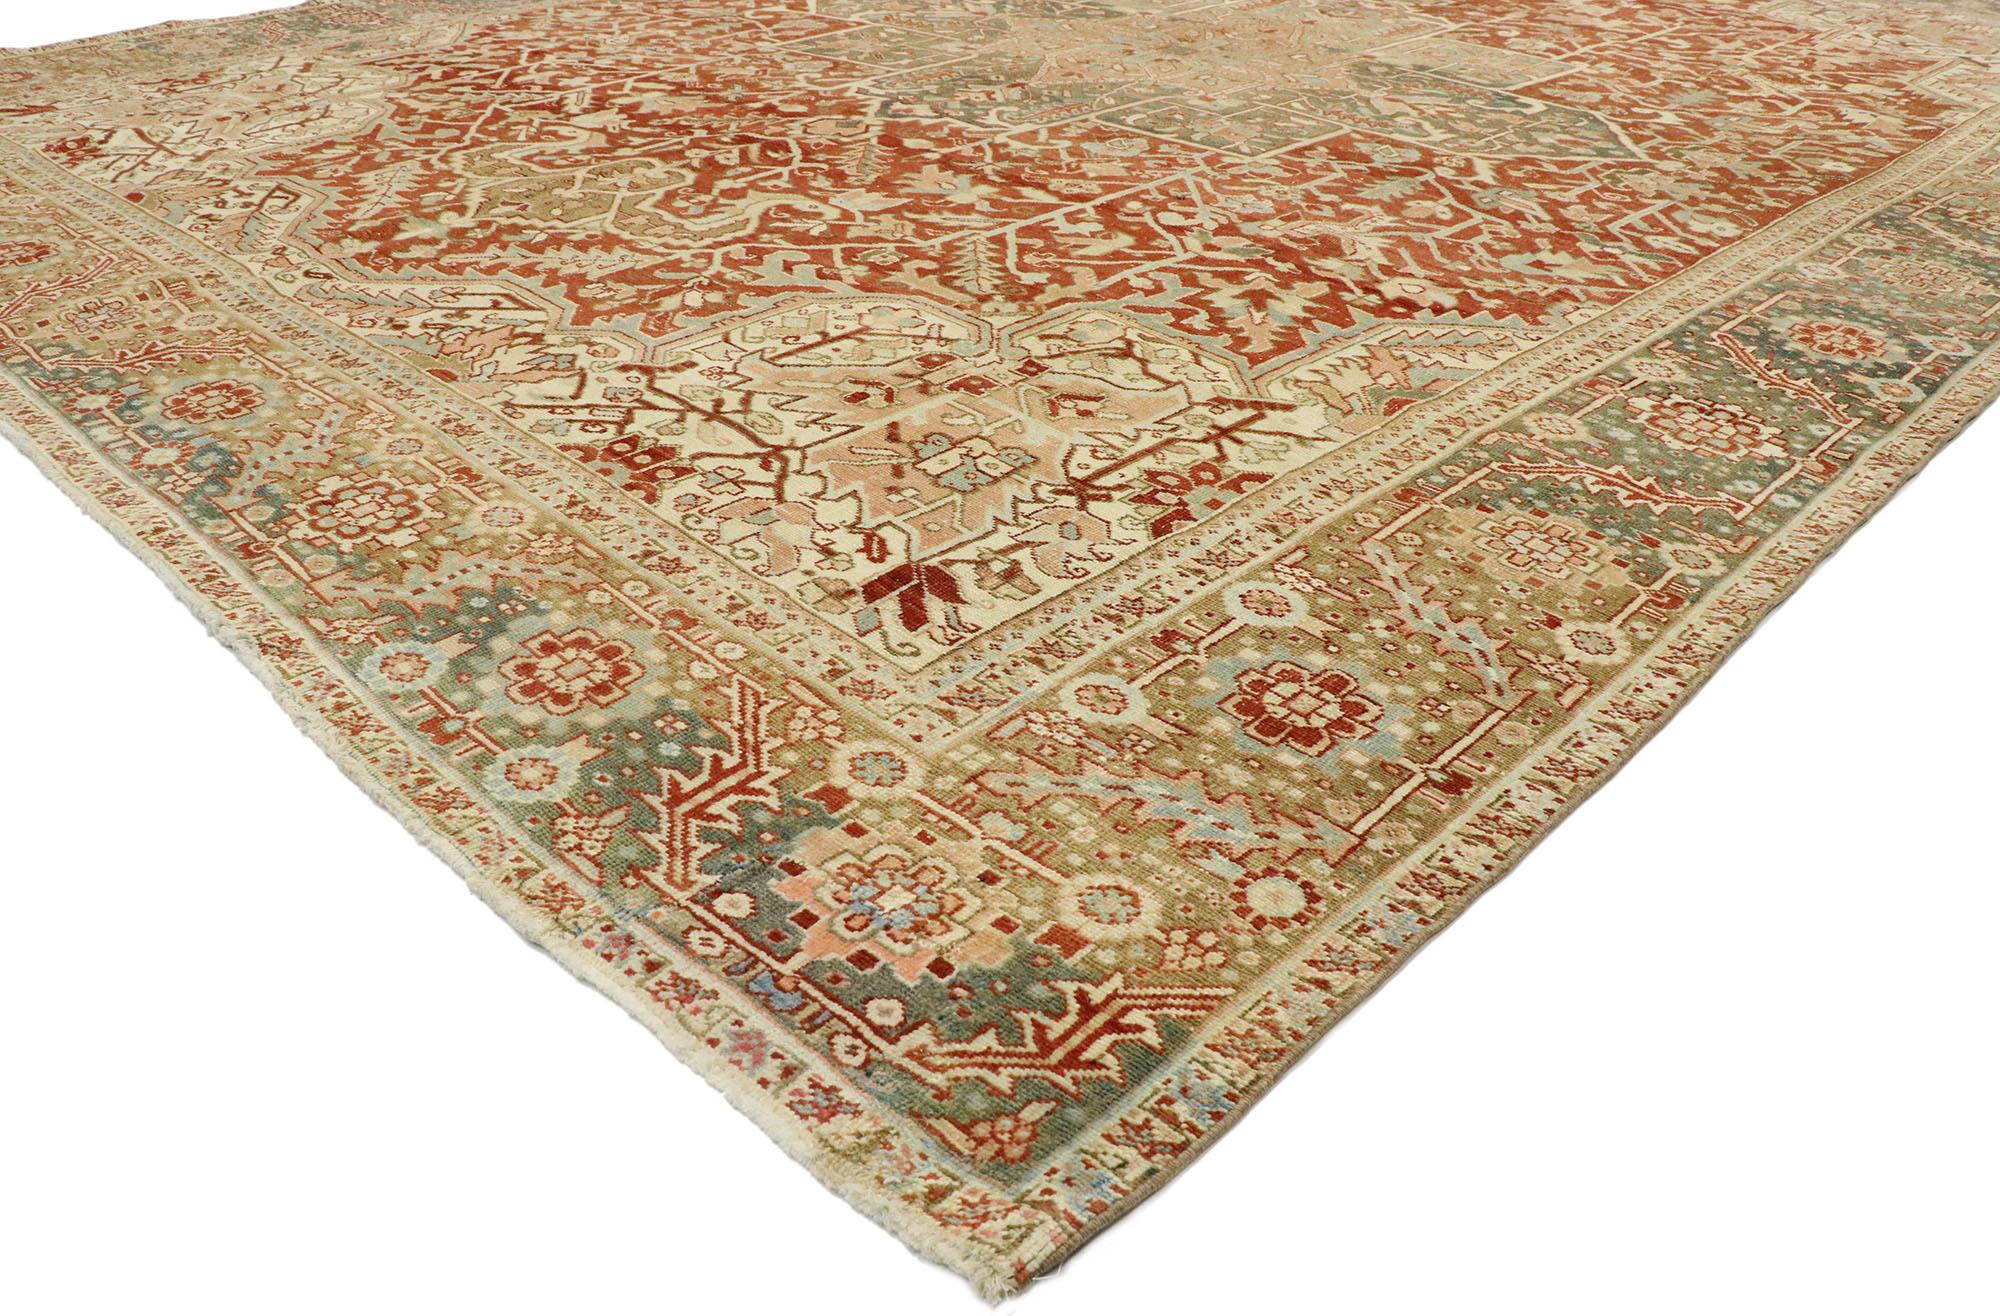 53172 Distressed Antique Persian Heriz Rug, 11'02 x 14'02. ​Persian Heriz rugs are esteemed handwoven carpets originating from the Heris region in northwest Iran, distinguished by their rectilinear geometric designs and meticulous outlining of